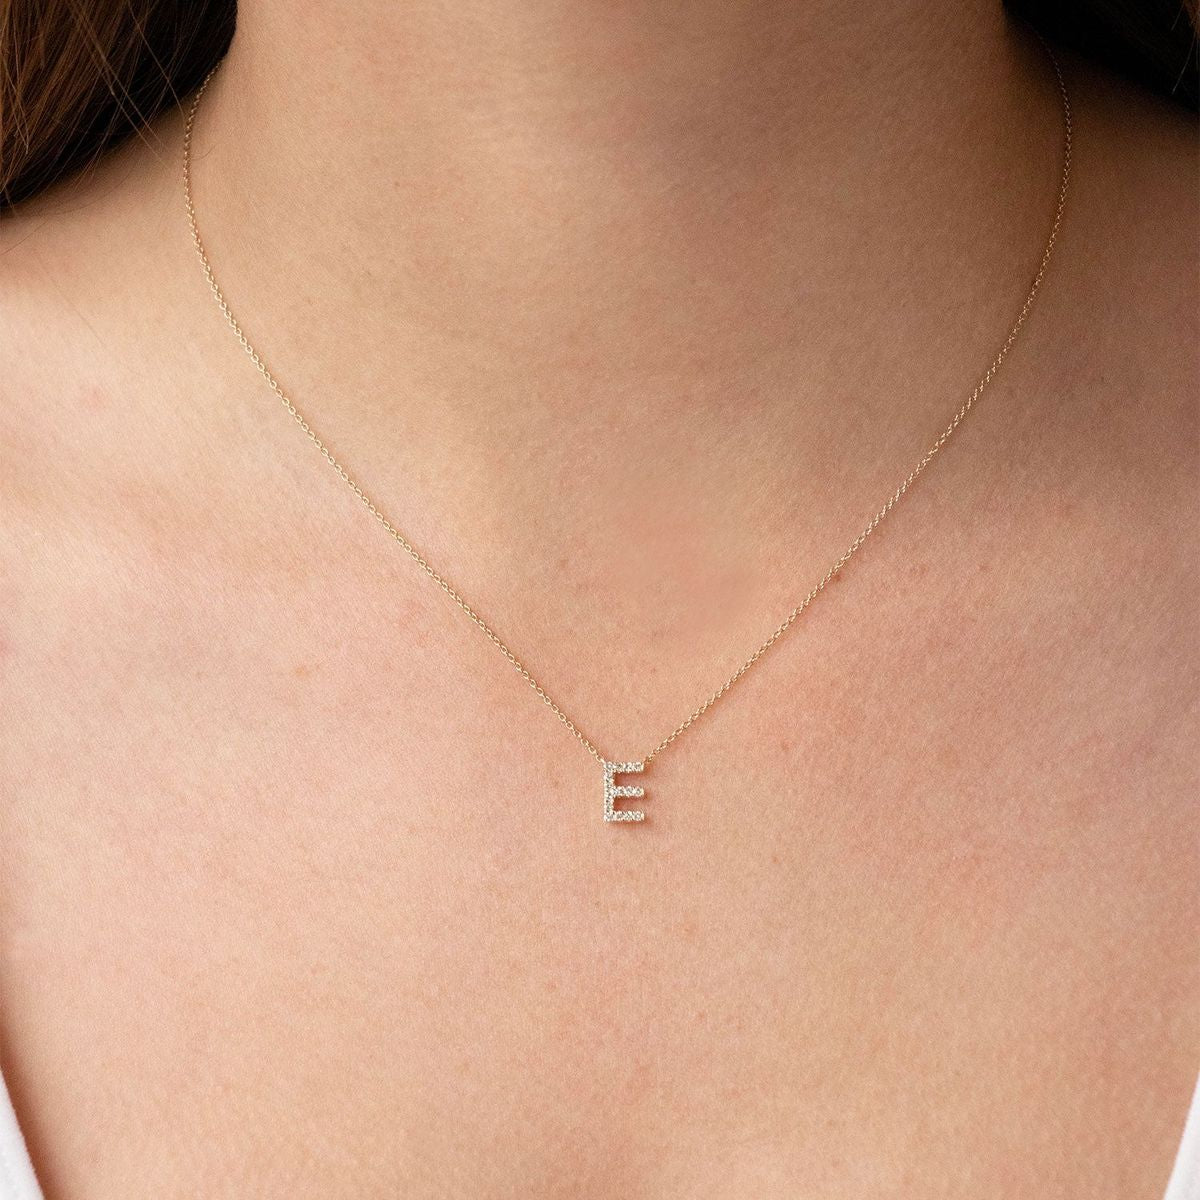 9ct Yellow Gold Diamond Initial 'E' Necklace